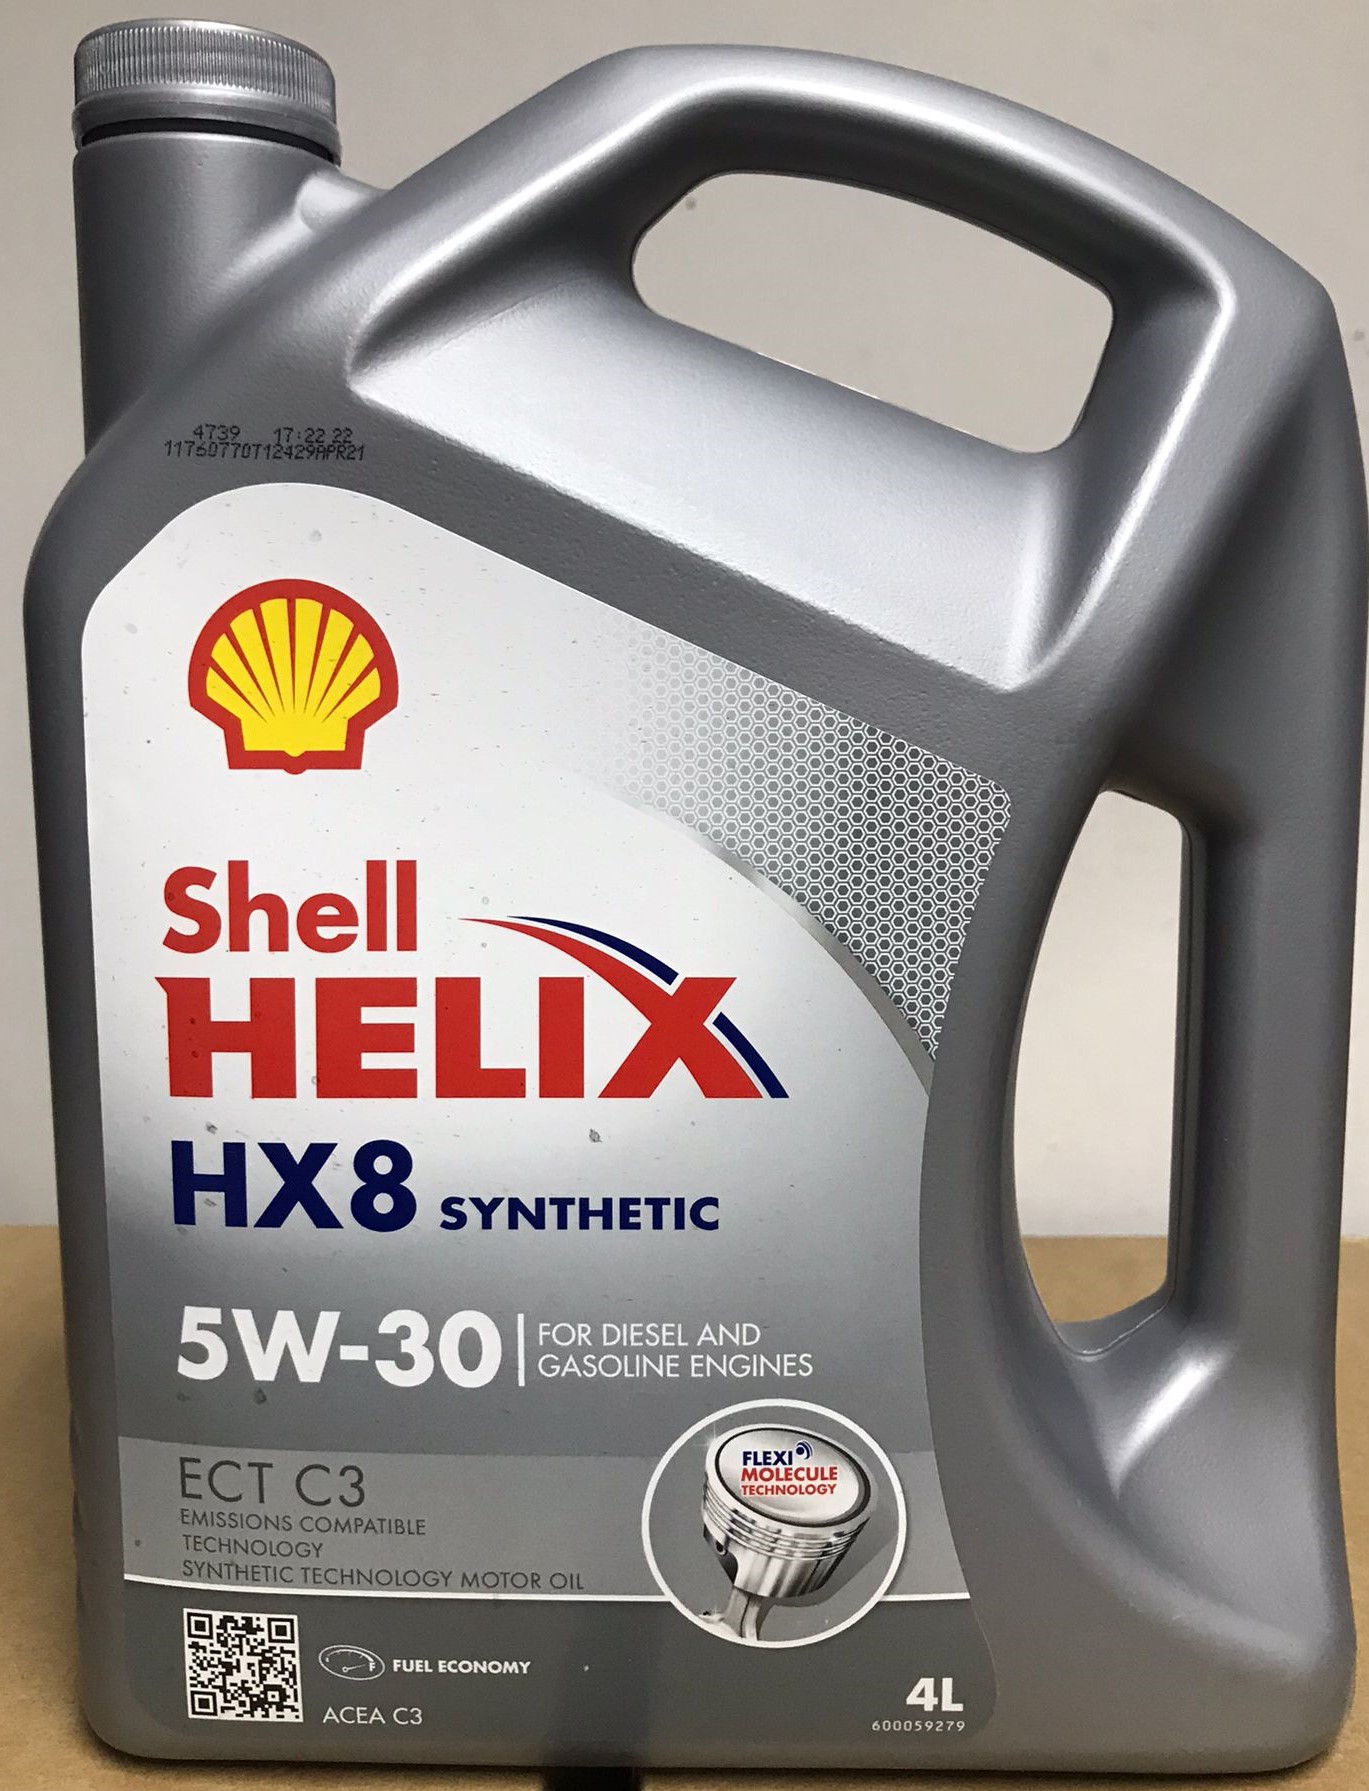 SHELL HELIX HX8 SYNTHETIC ECT C3  4 LT